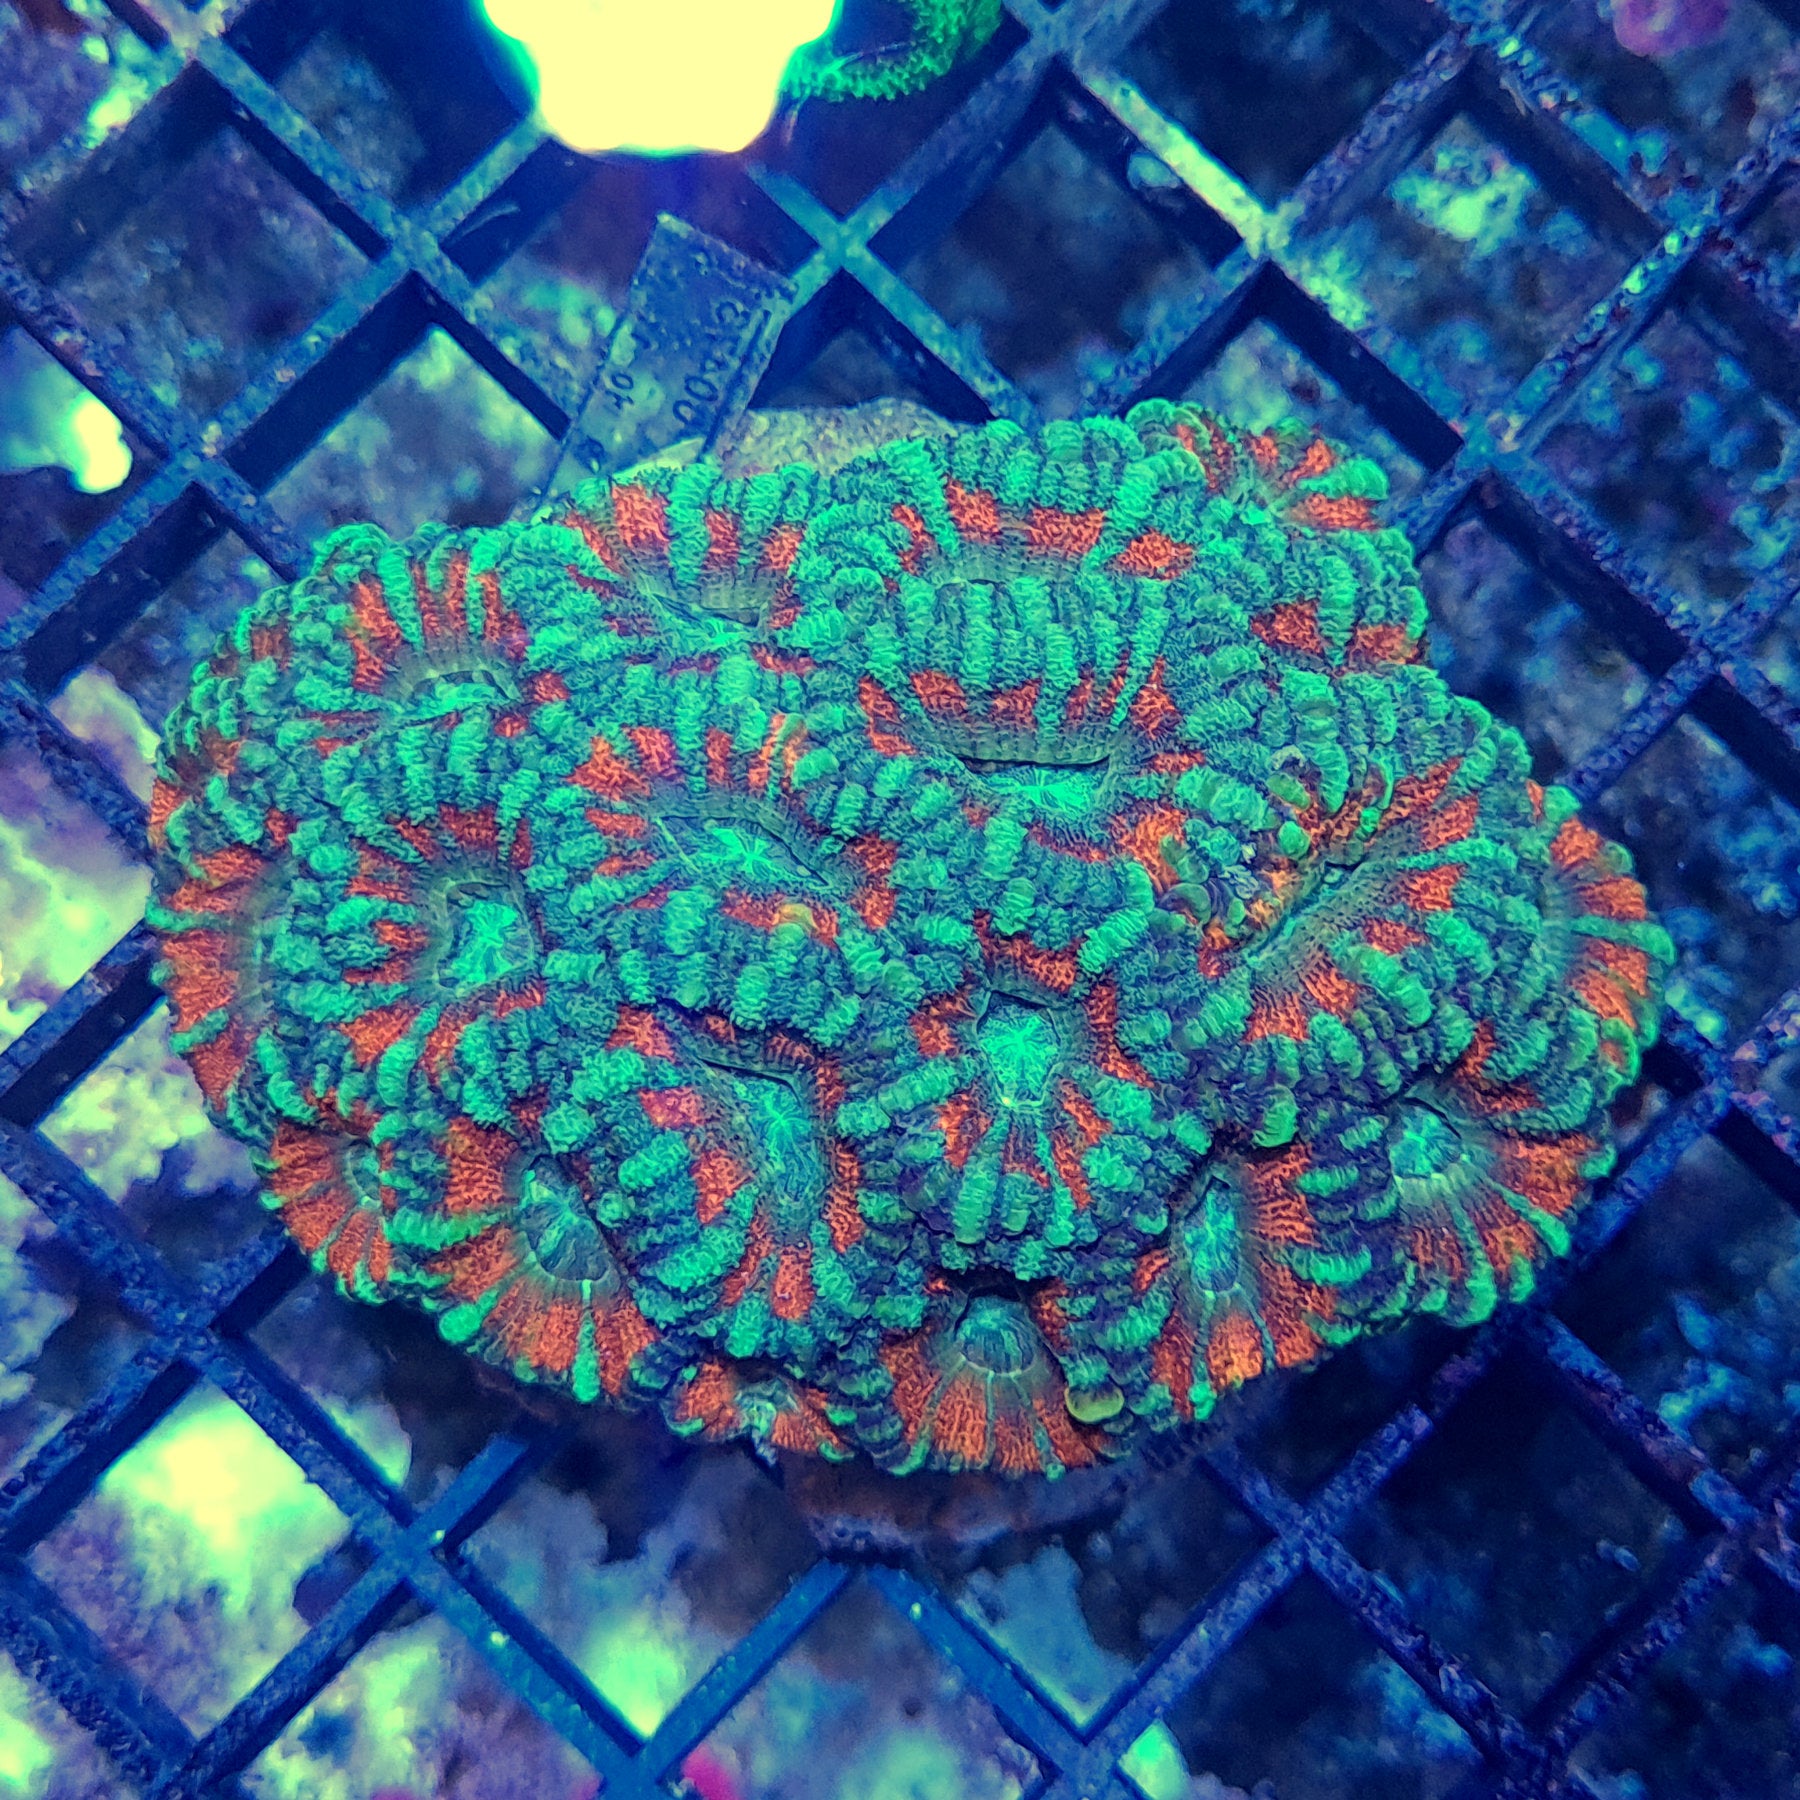 Large Red A-Grade Acan Lord Coral (Micromussa lordhowensis) – Essex ...